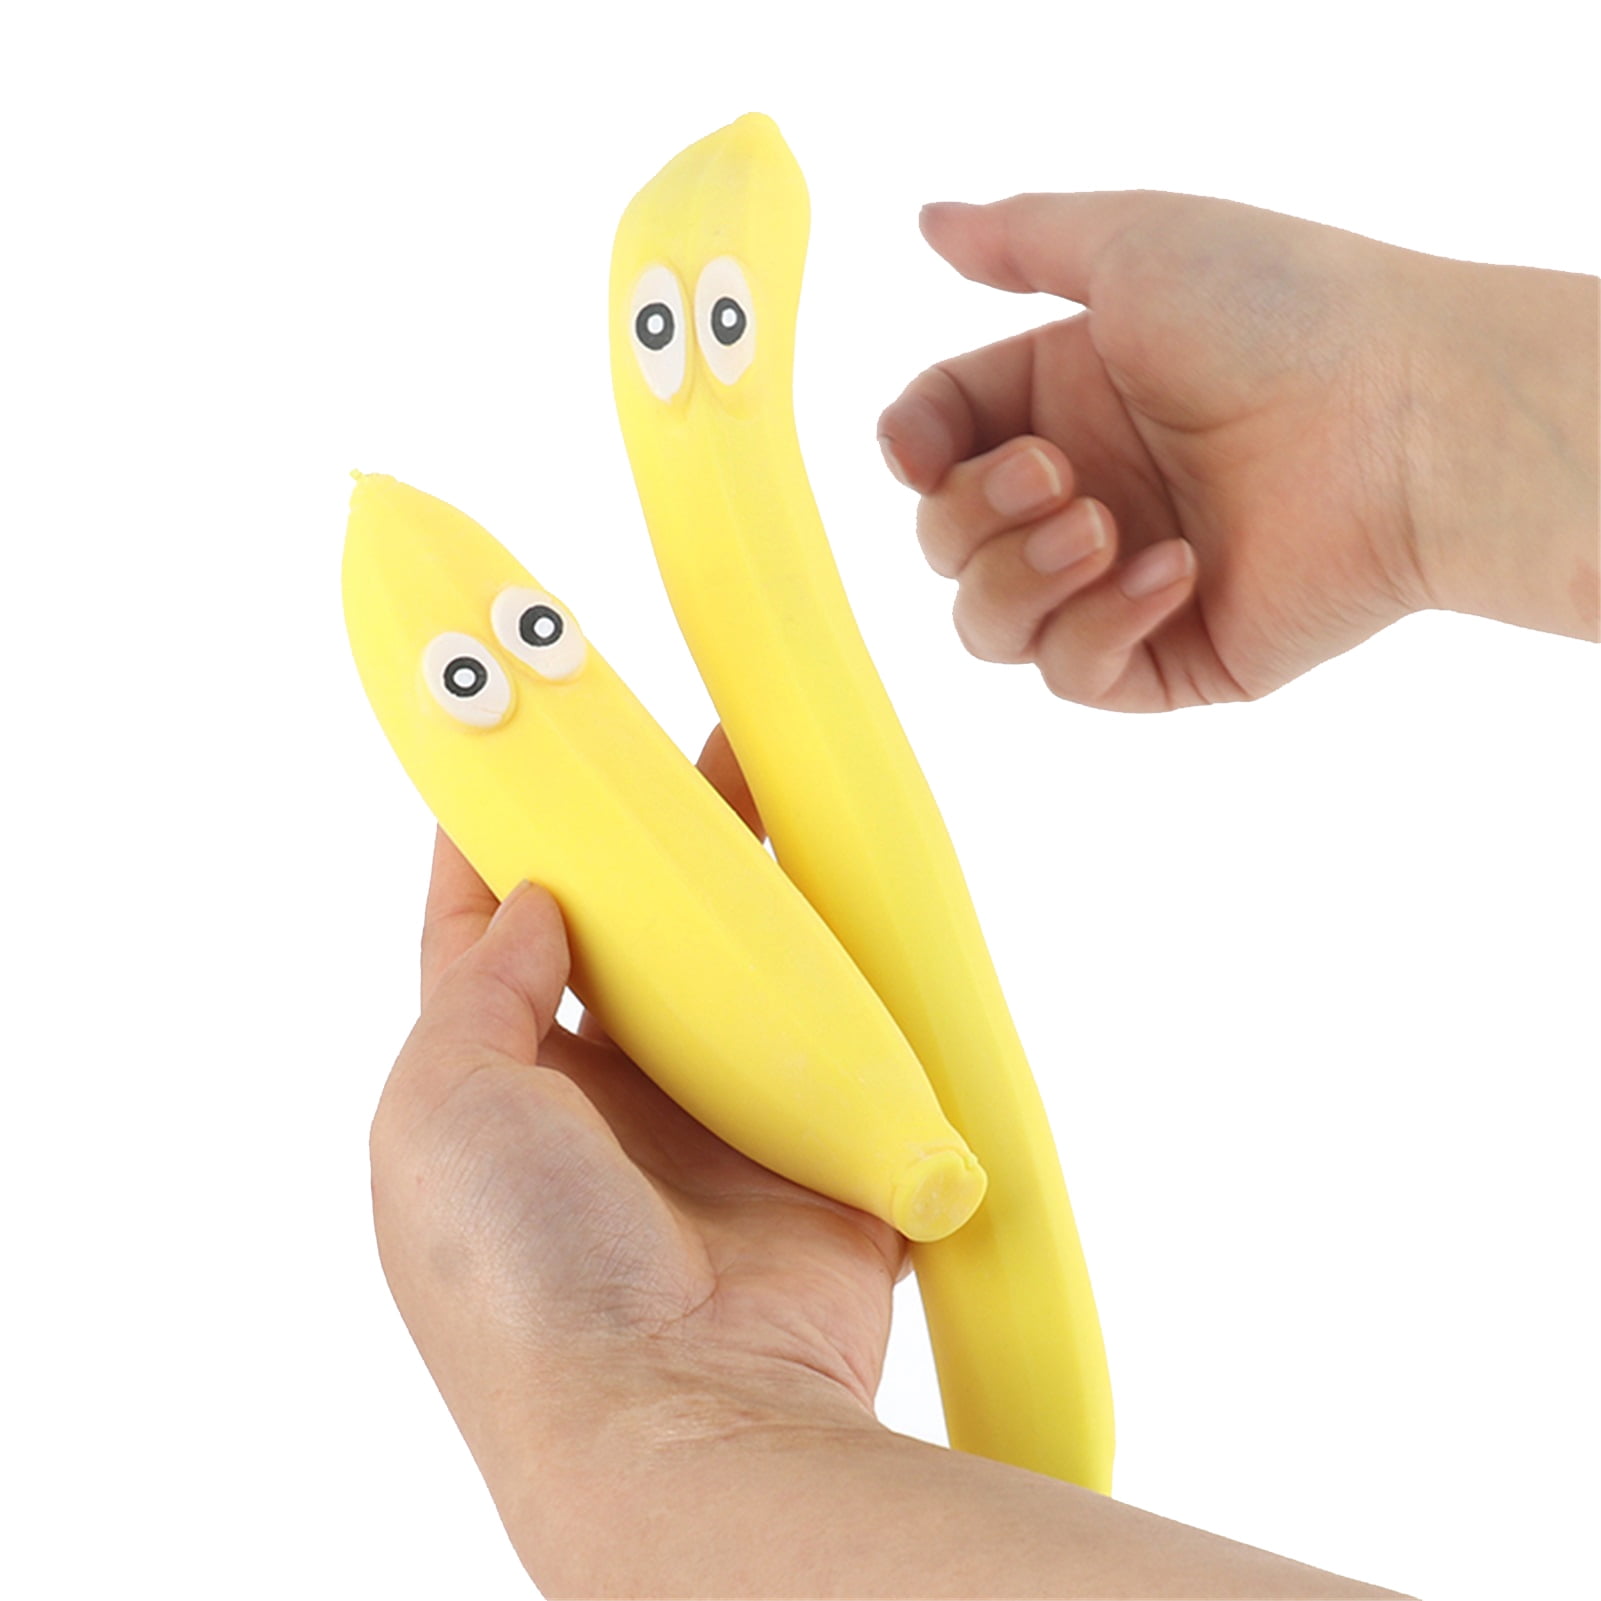 Brand New Jokes And Gags Squeezy Stress Relief Banana Toy Toys & Games 